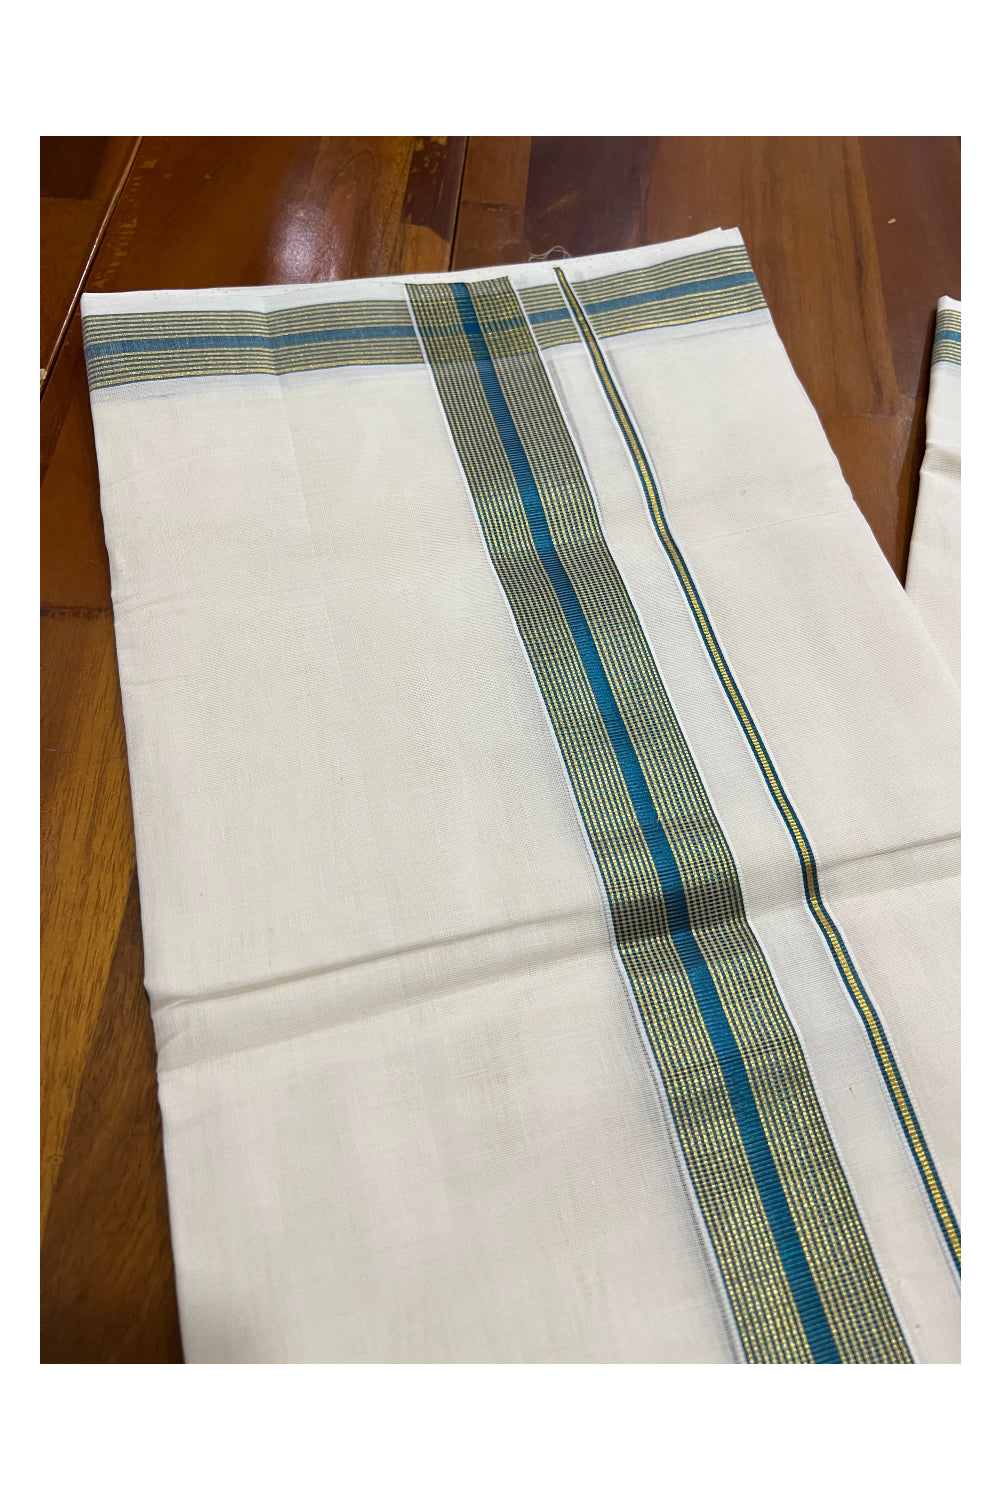 Southloom Kuthampully Handloom Pure Cotton Mundu with Golden and Teal Blue Kasavu Border (South Indian Dhoti)